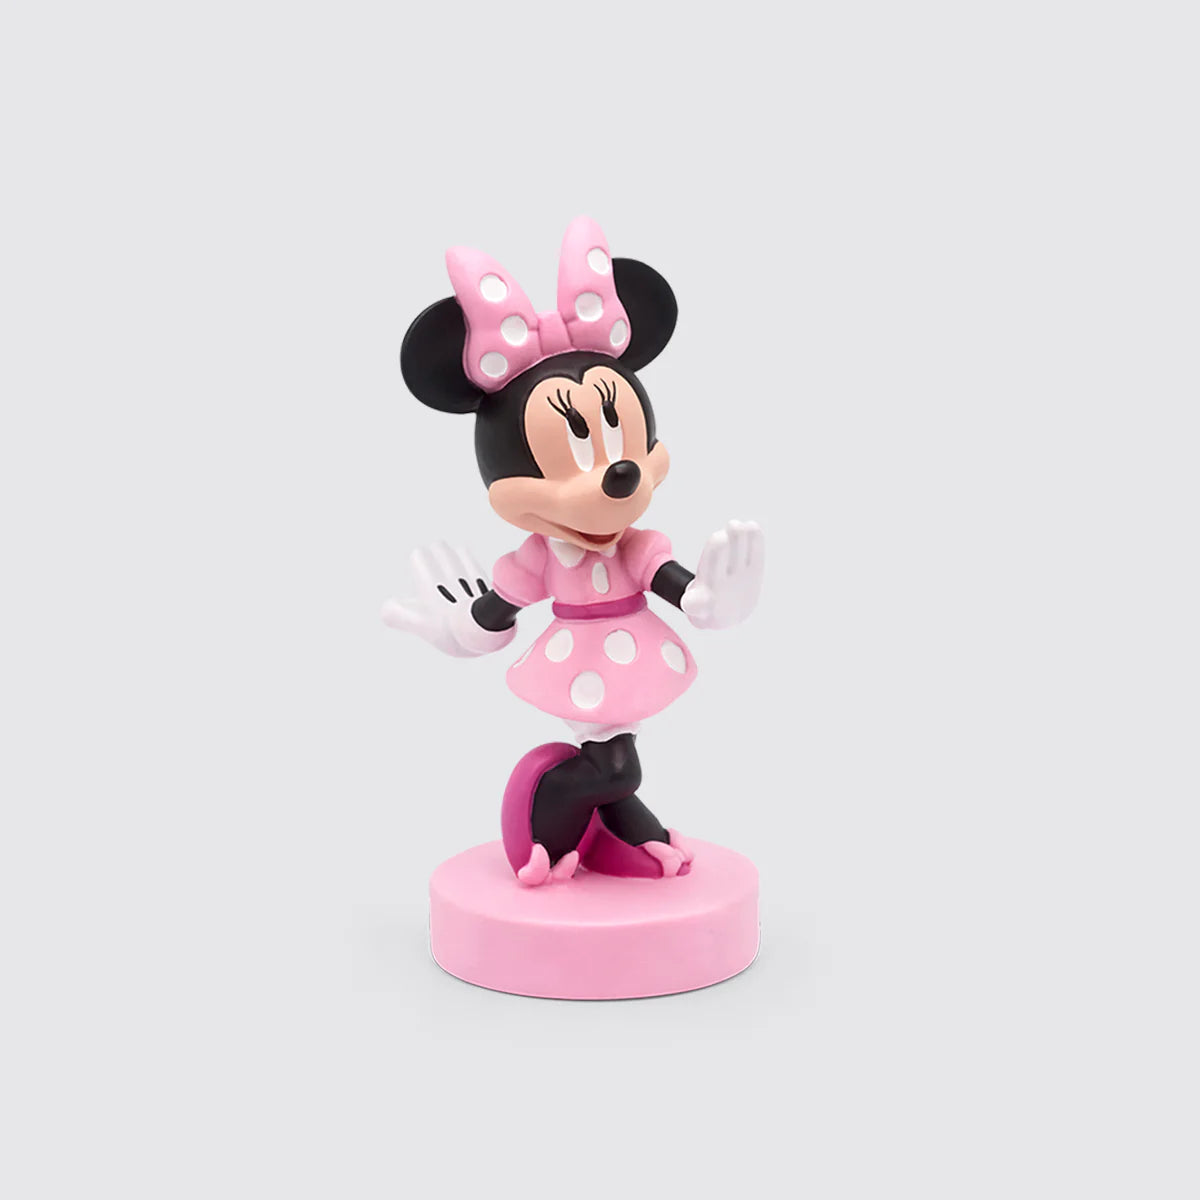 Disney: Minnie Mouse by Tonies #10000655